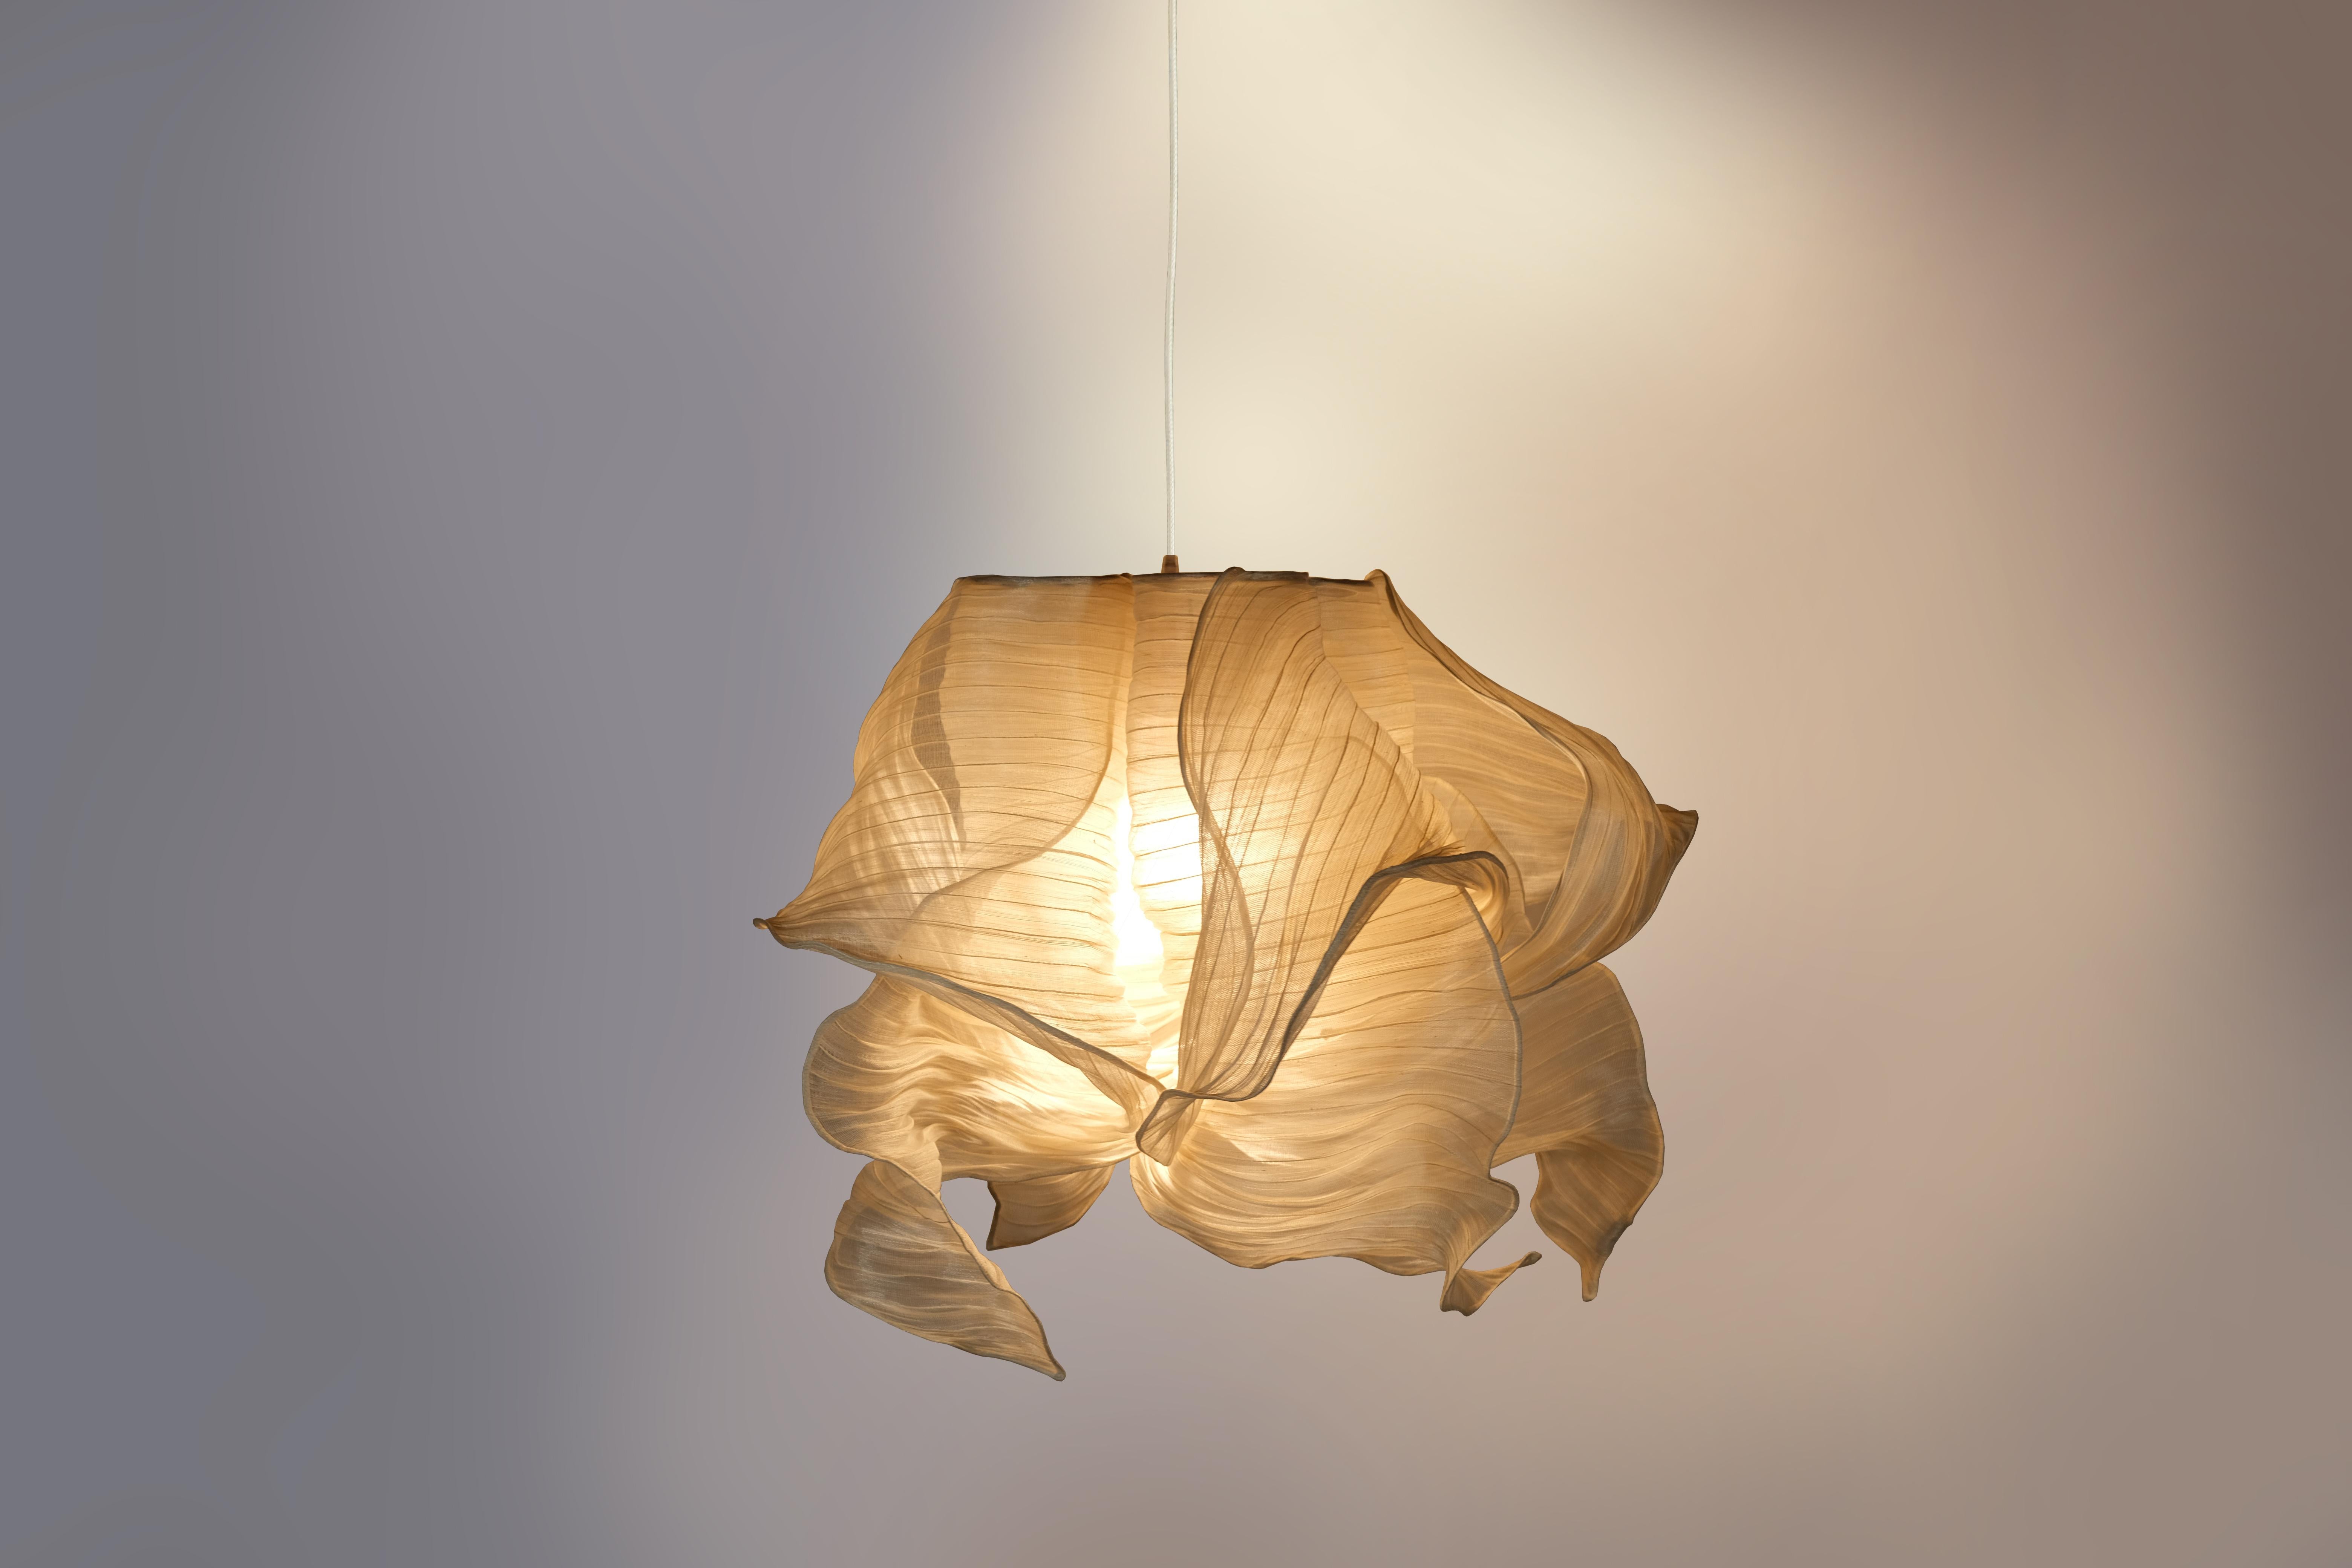 Cream Nebula pendant lamp by Mirei Monticelli
Dimensions: D 60 x W 60 x H 60 cm
Materials: Banaca fabric
Available in other colors.

Providing soft light in an organic and unique design, the Nebula Lamp draws its inspiration from the